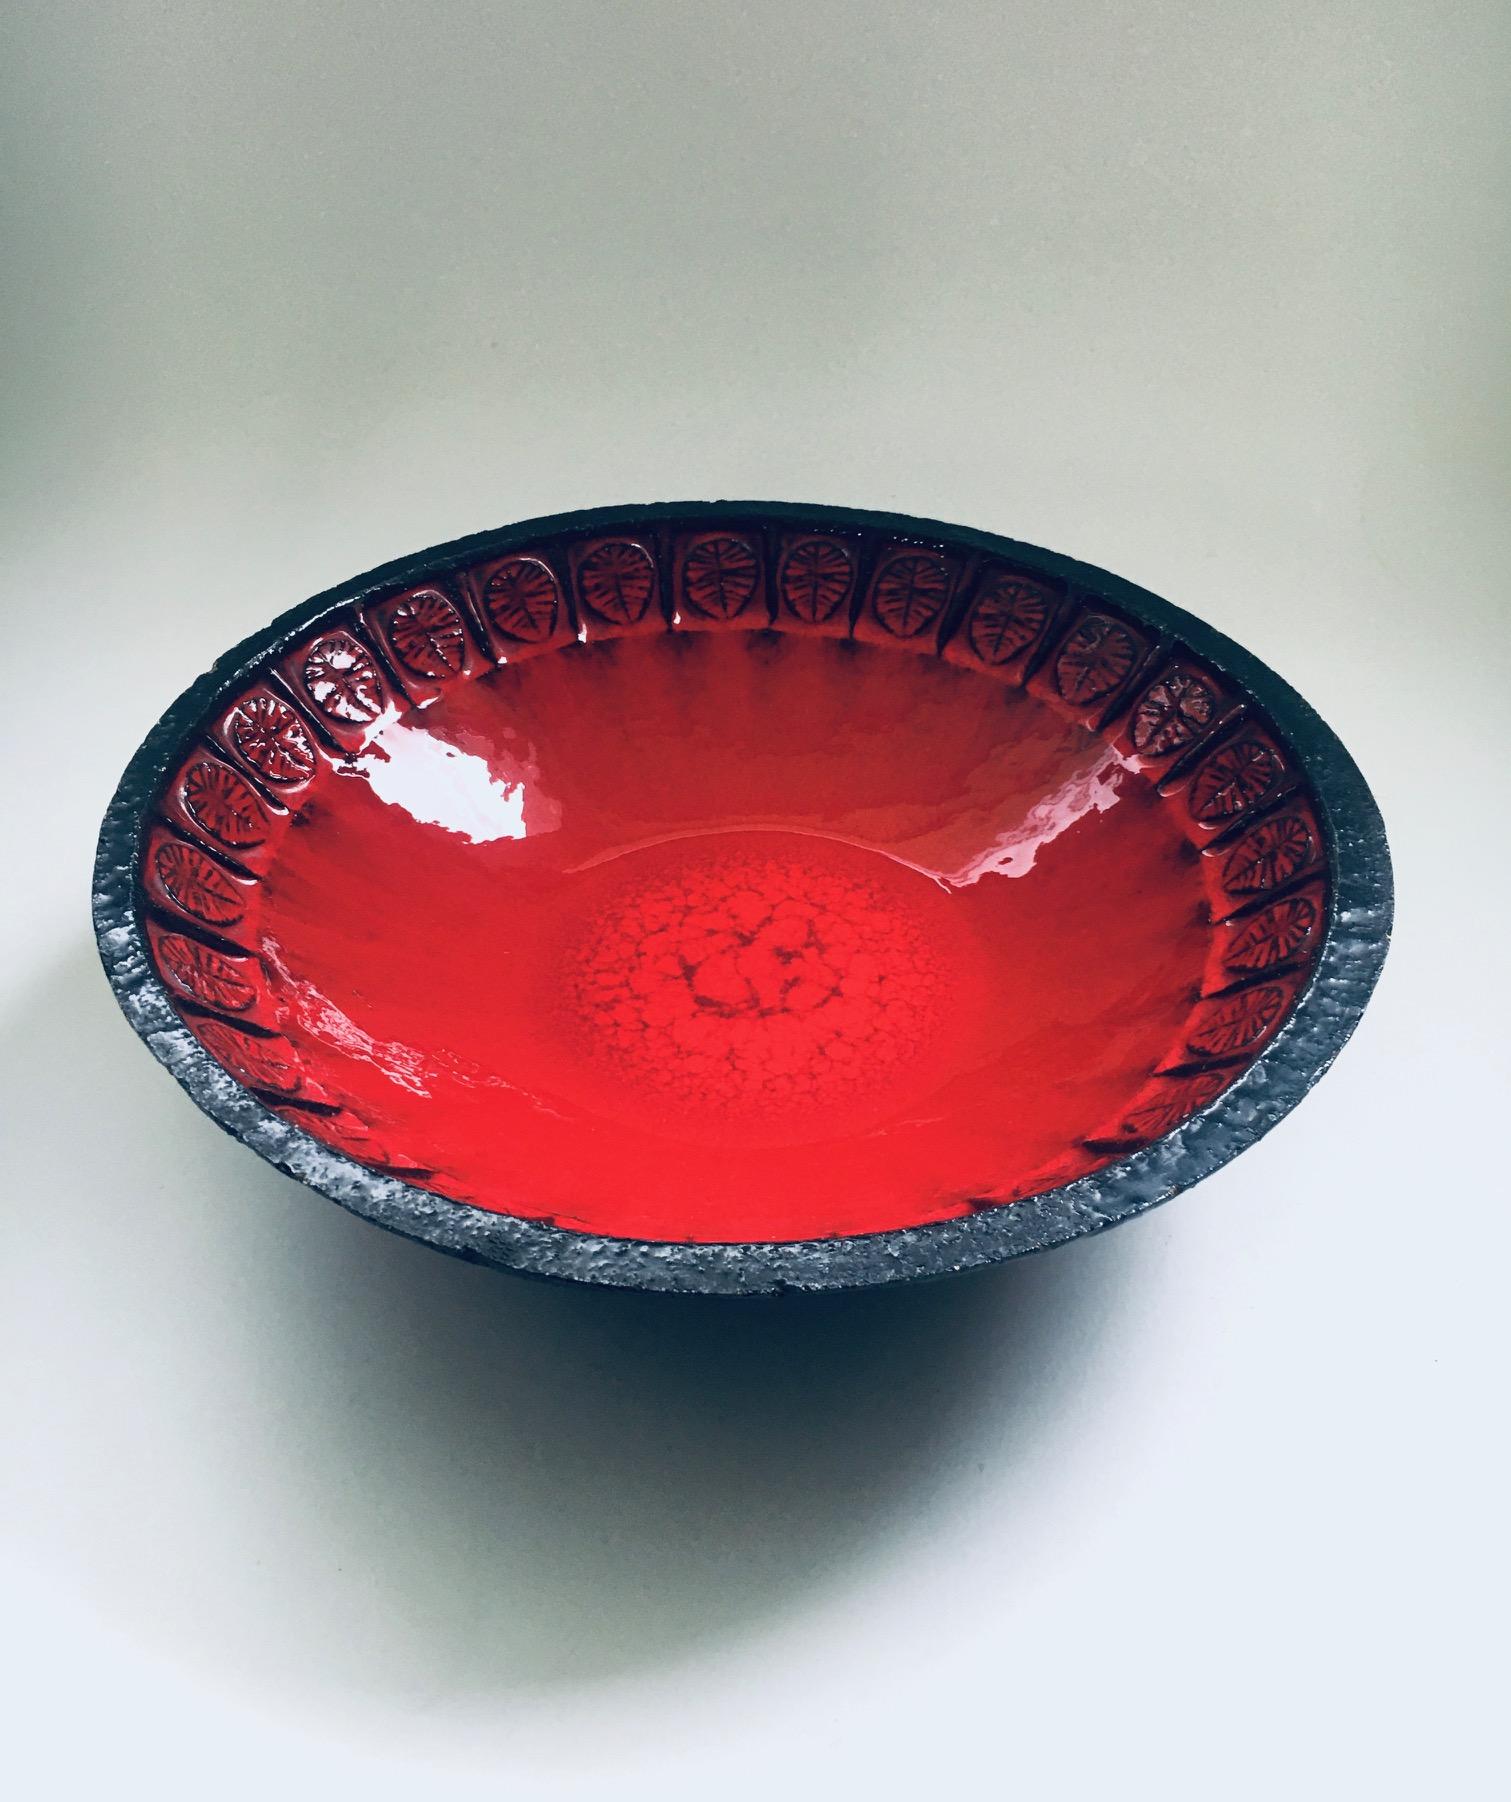 Vintage Midcentury Modern Brutalist in style Art Ceramics Studio Bowl by Jan Nolf for Perignem Studios. Made in Belgium, 1960's. Round selenium red and black glazed bowl with abstract leaf motif on the border. This comes in very good condition.